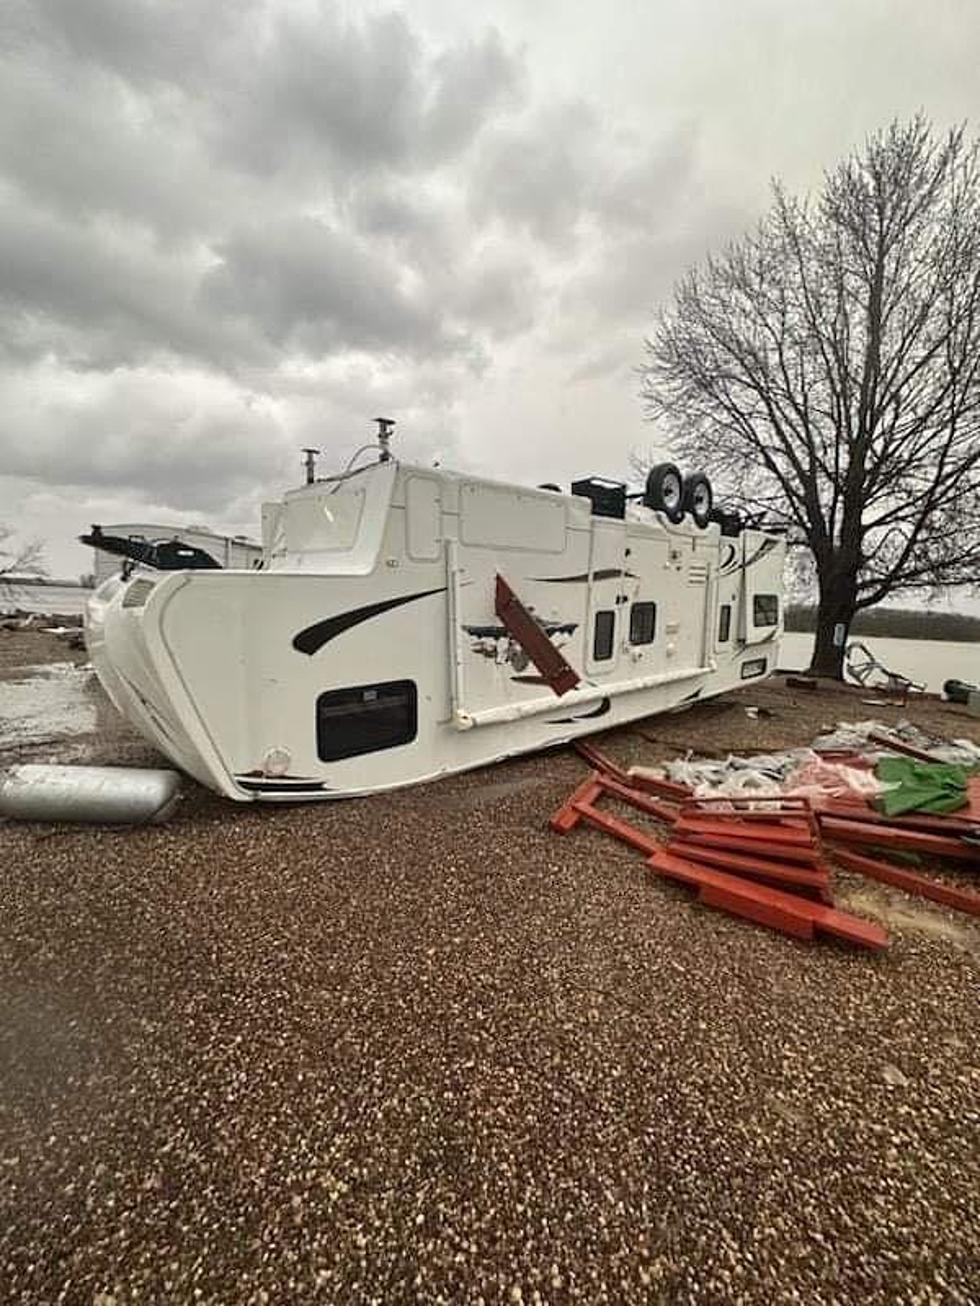 Severe Weather Causes Damage in Bellevue, IA Friday (Photos)